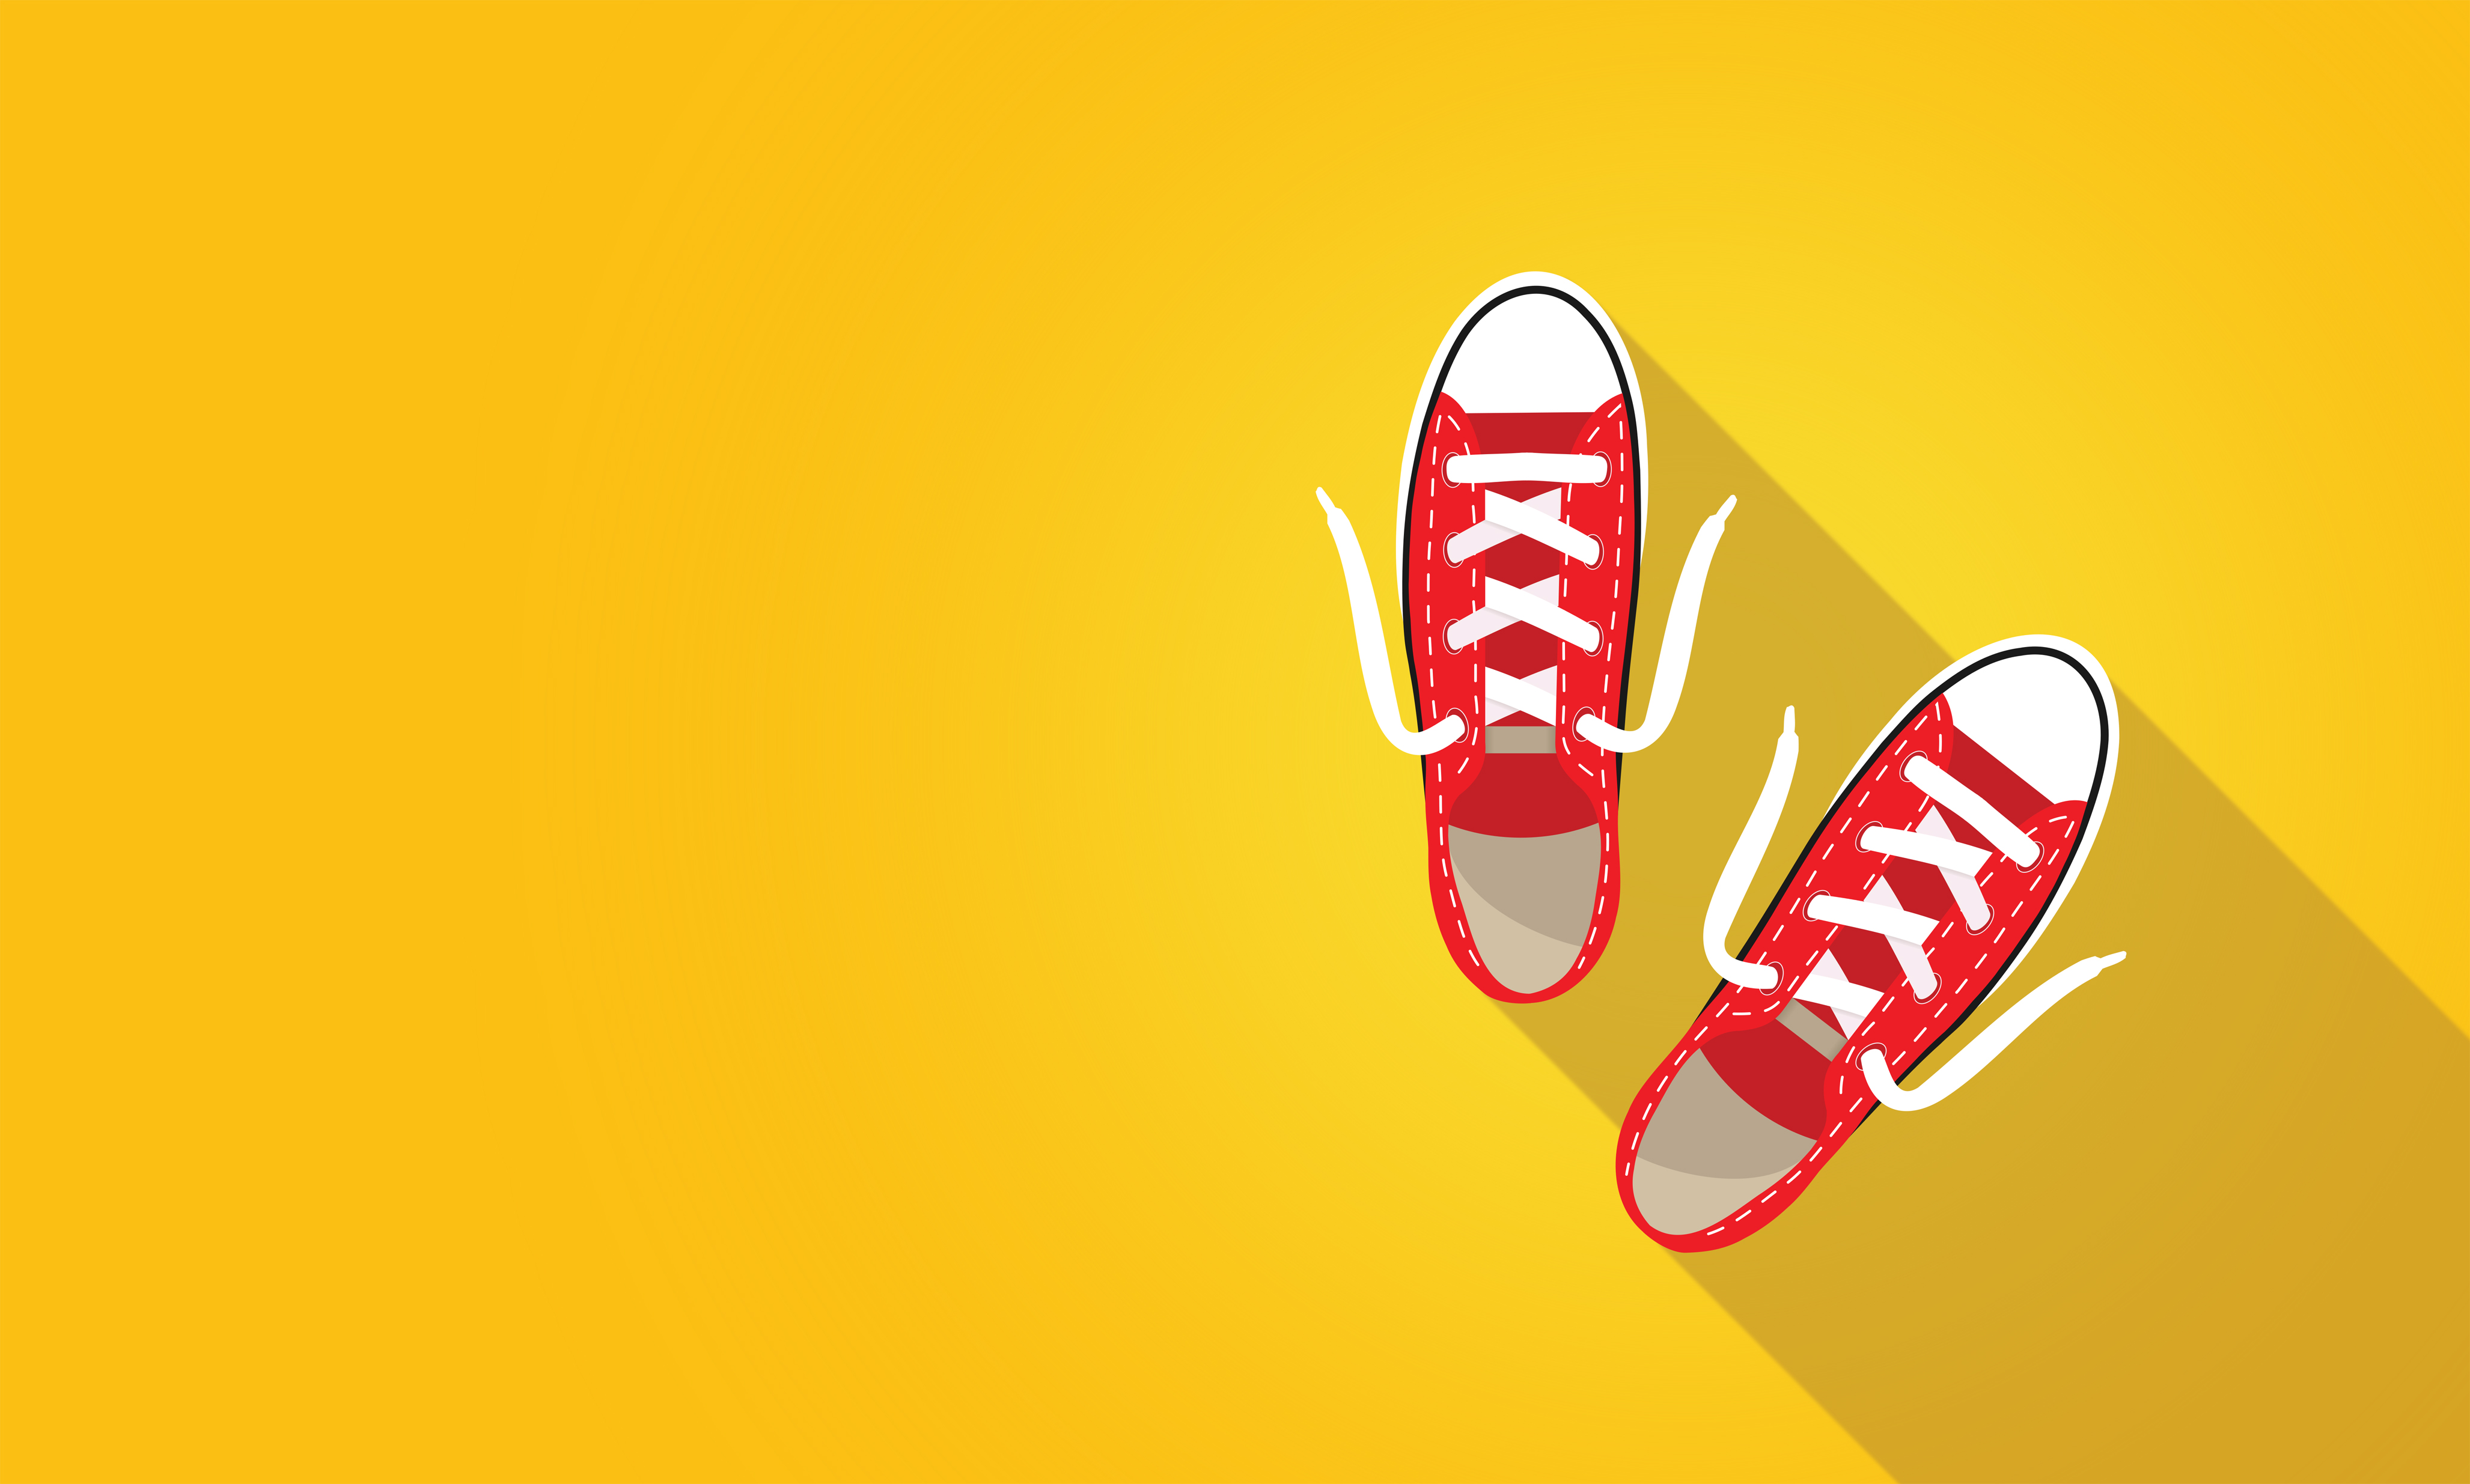 Photo Red Sneakers On Bright Yellow Background Abstract